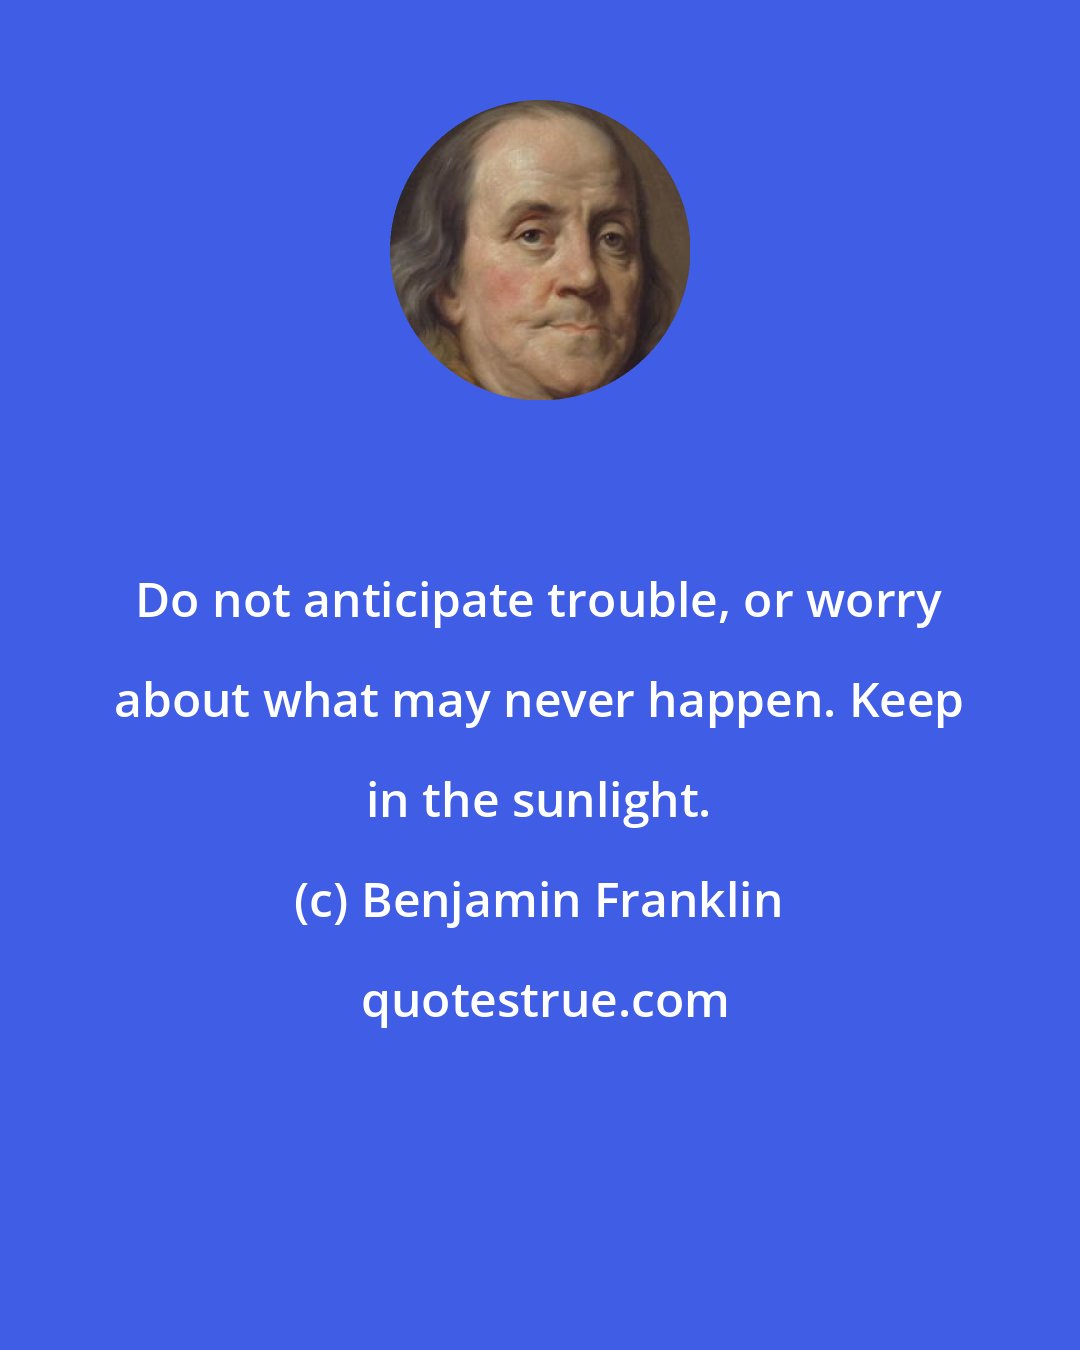 Benjamin Franklin: Do not anticipate trouble, or worry about what may never happen. Keep in the sunlight.